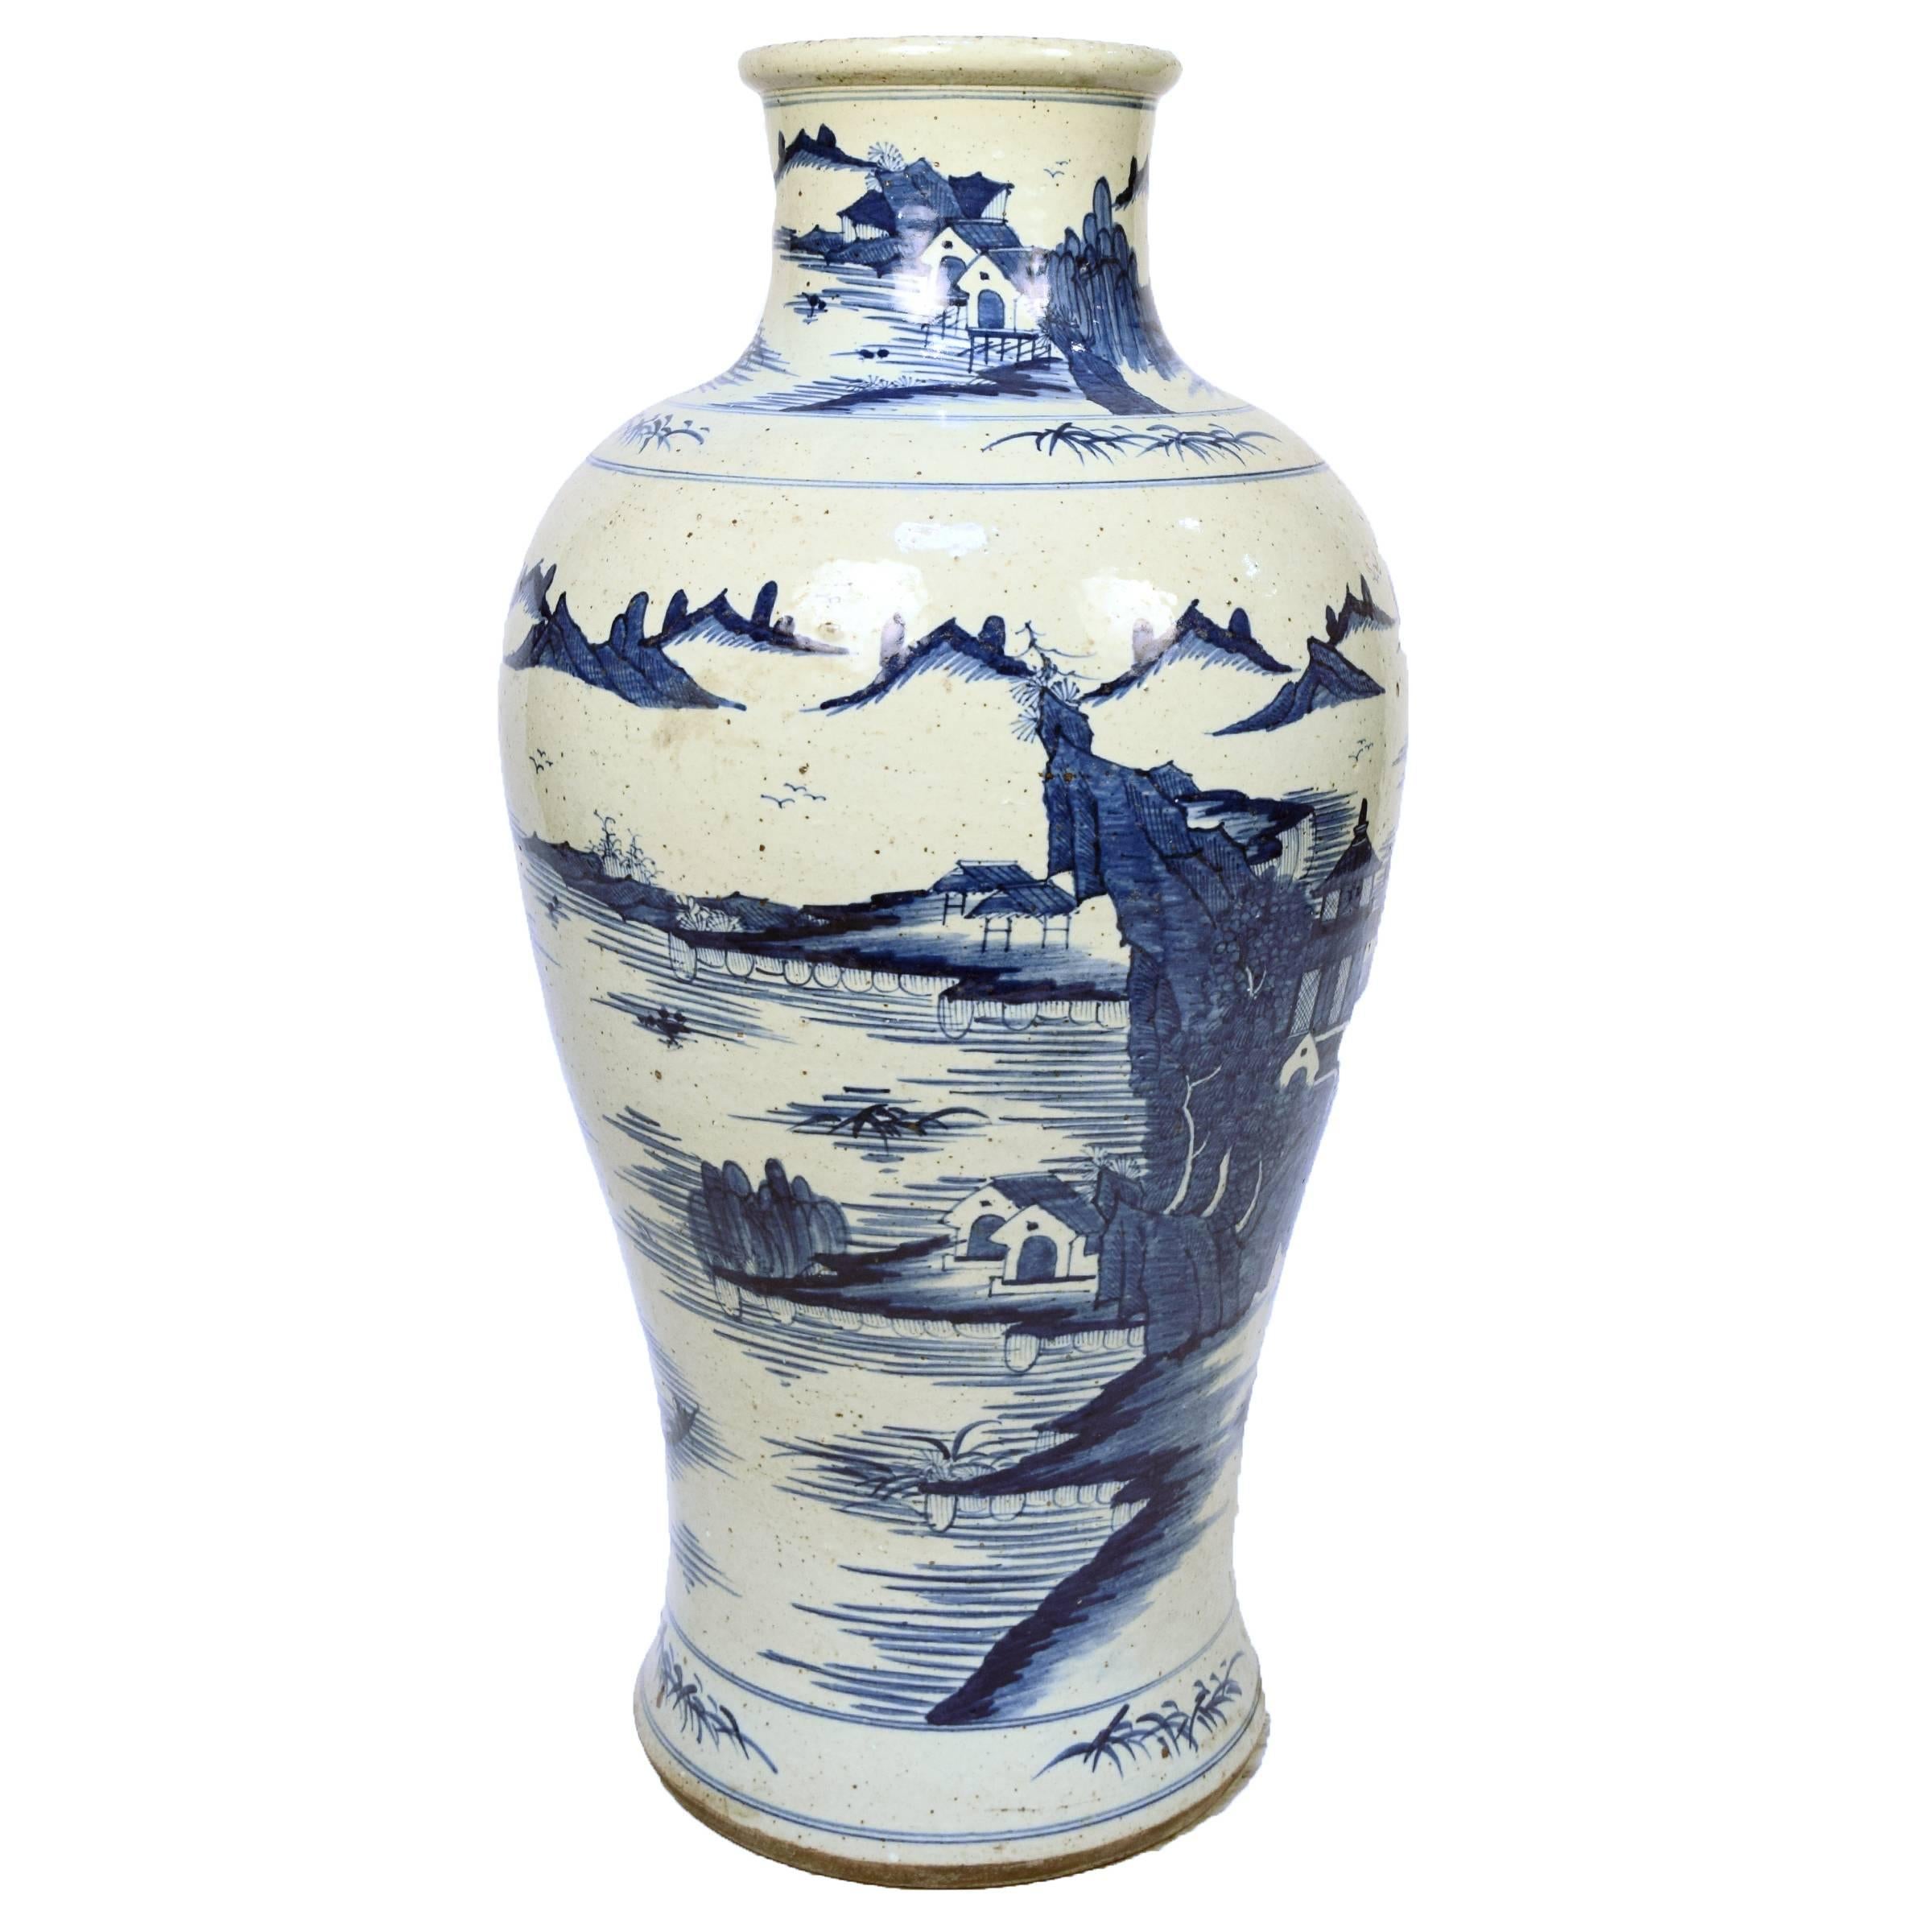 Introduced to Europe in the 14th century, Chinese blue-and-white porcelains were highly sought after as luxury items and are still avidly collected by connoisseurs today. This bottle-shaped vase from Jiangxi province is decorated with a landscape